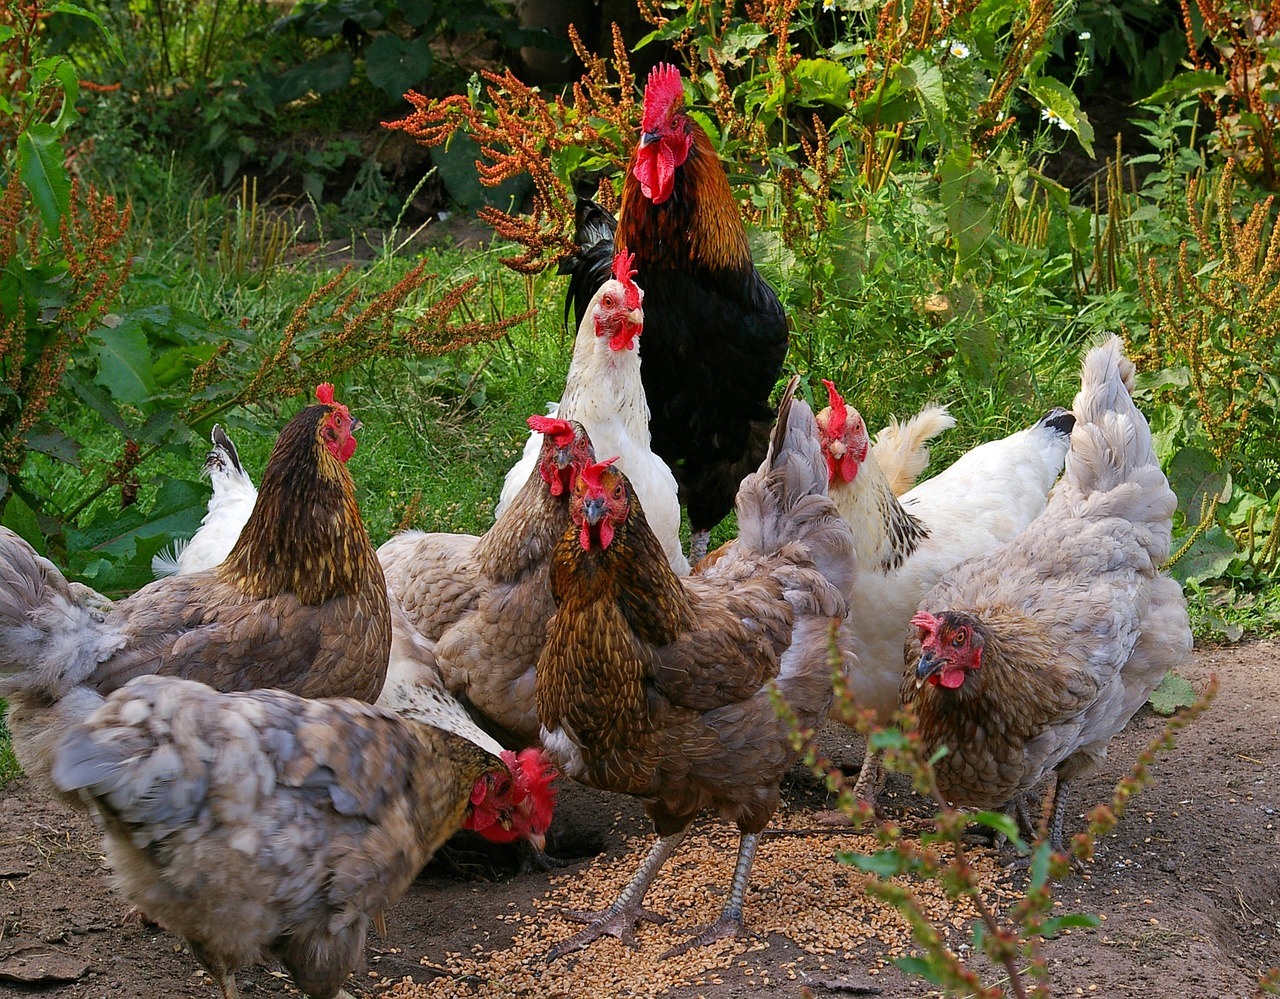 A Rooster with his hens.